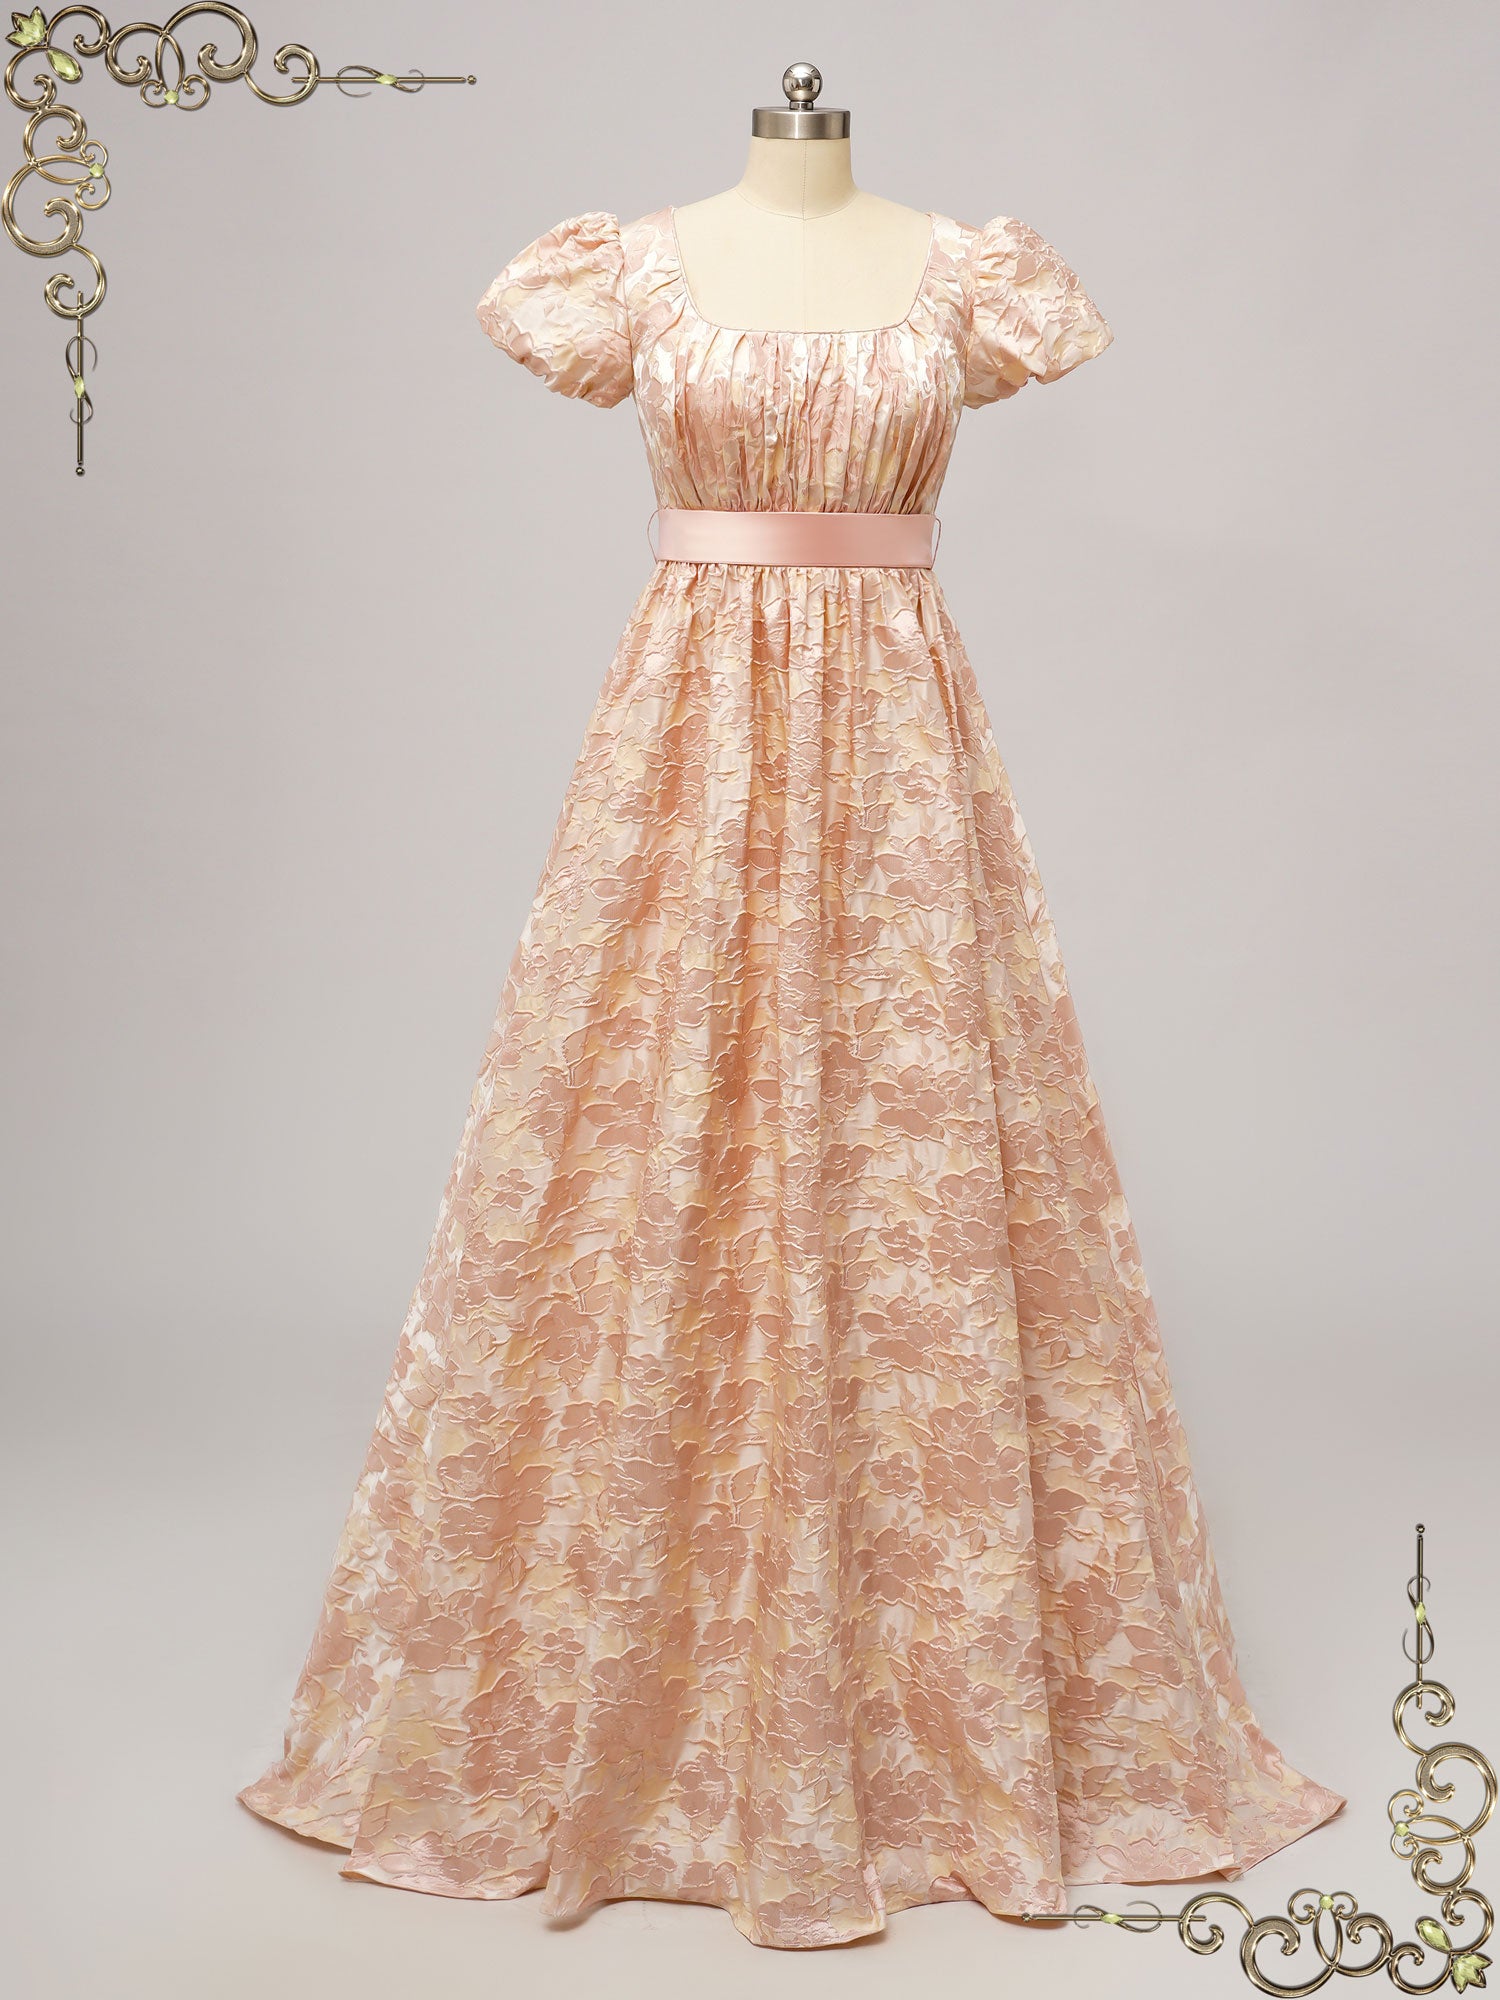 Regency Wedding Dress from Suzanne Neville - hitched.ie